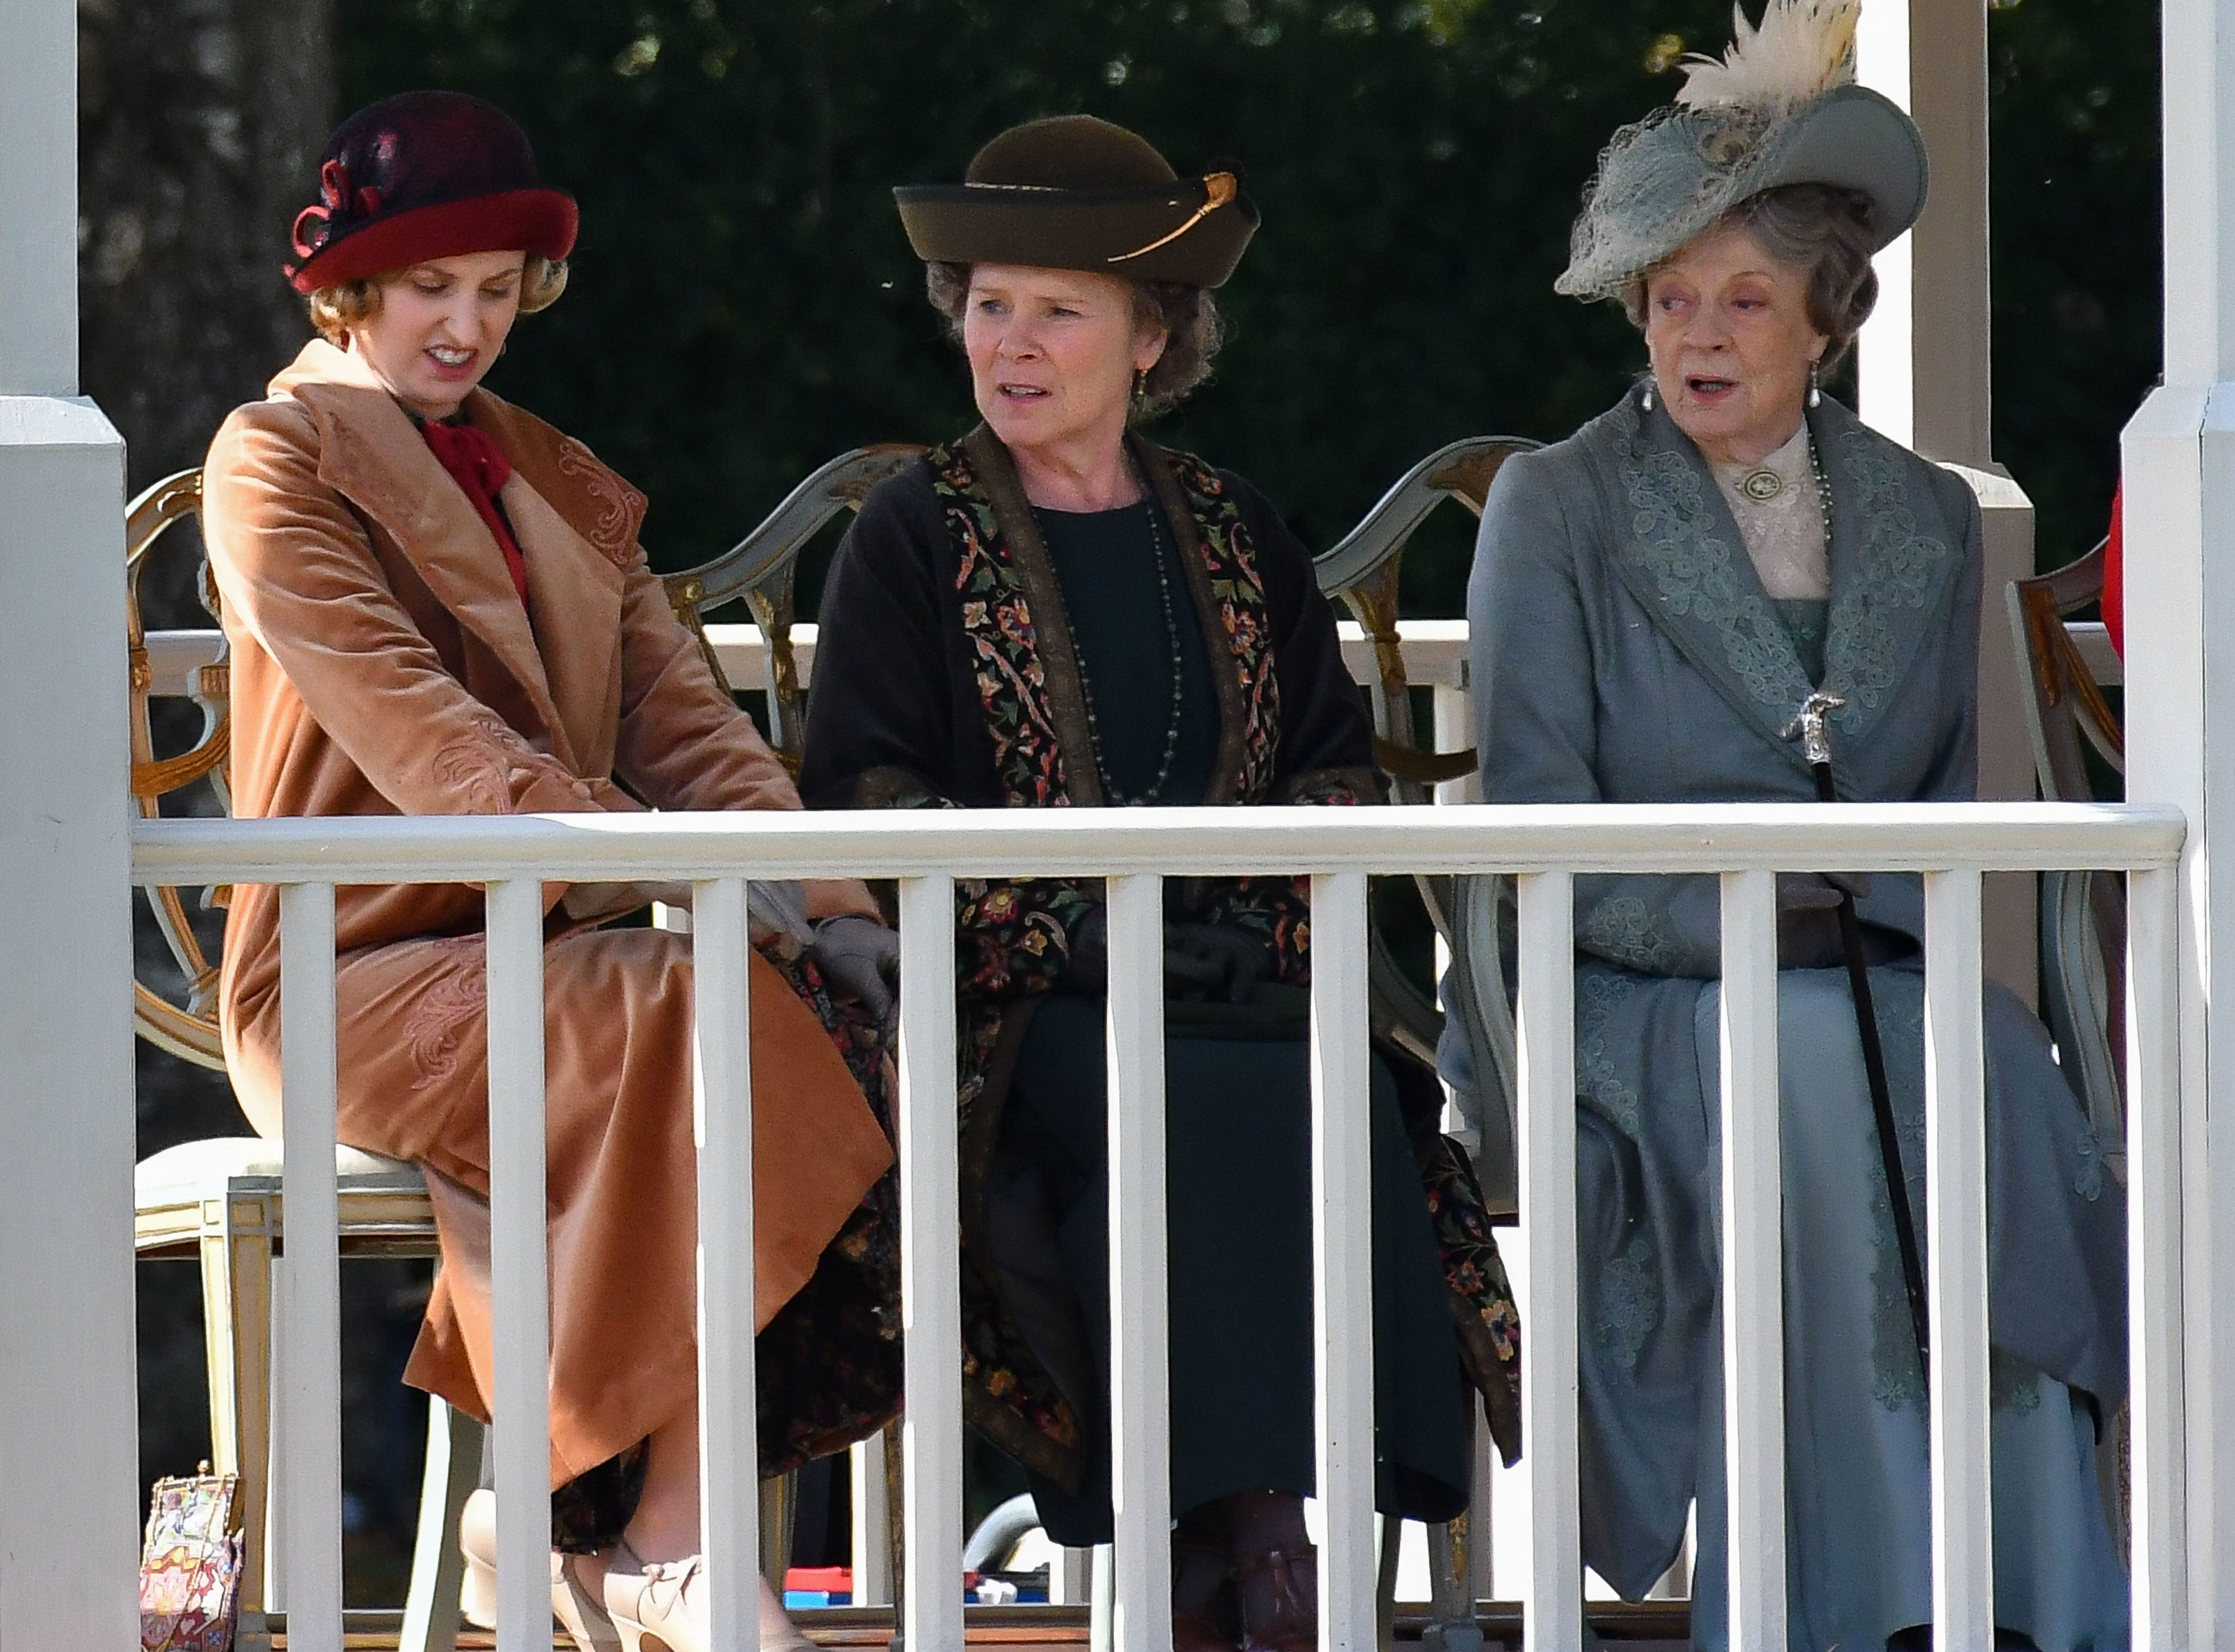 <p>Here's a peek at more of the costumes worn by Laura Carmichael (as Lady Edith), Imelda Staunton (as Maud, Baroness Bagshaw -- a Crawley cousin and lady-in-waiting to Queen Mary) and Maggie Smith (as Violet Crawley, Dowager Countess of Grantham) as they filmed the "Downton Abbey" movie in Wiltshire, England, in 2018. Fun fact: In real life, Imelda is married to Jim Carter, who plays retired butler Charles Carson in the franchise.</p>